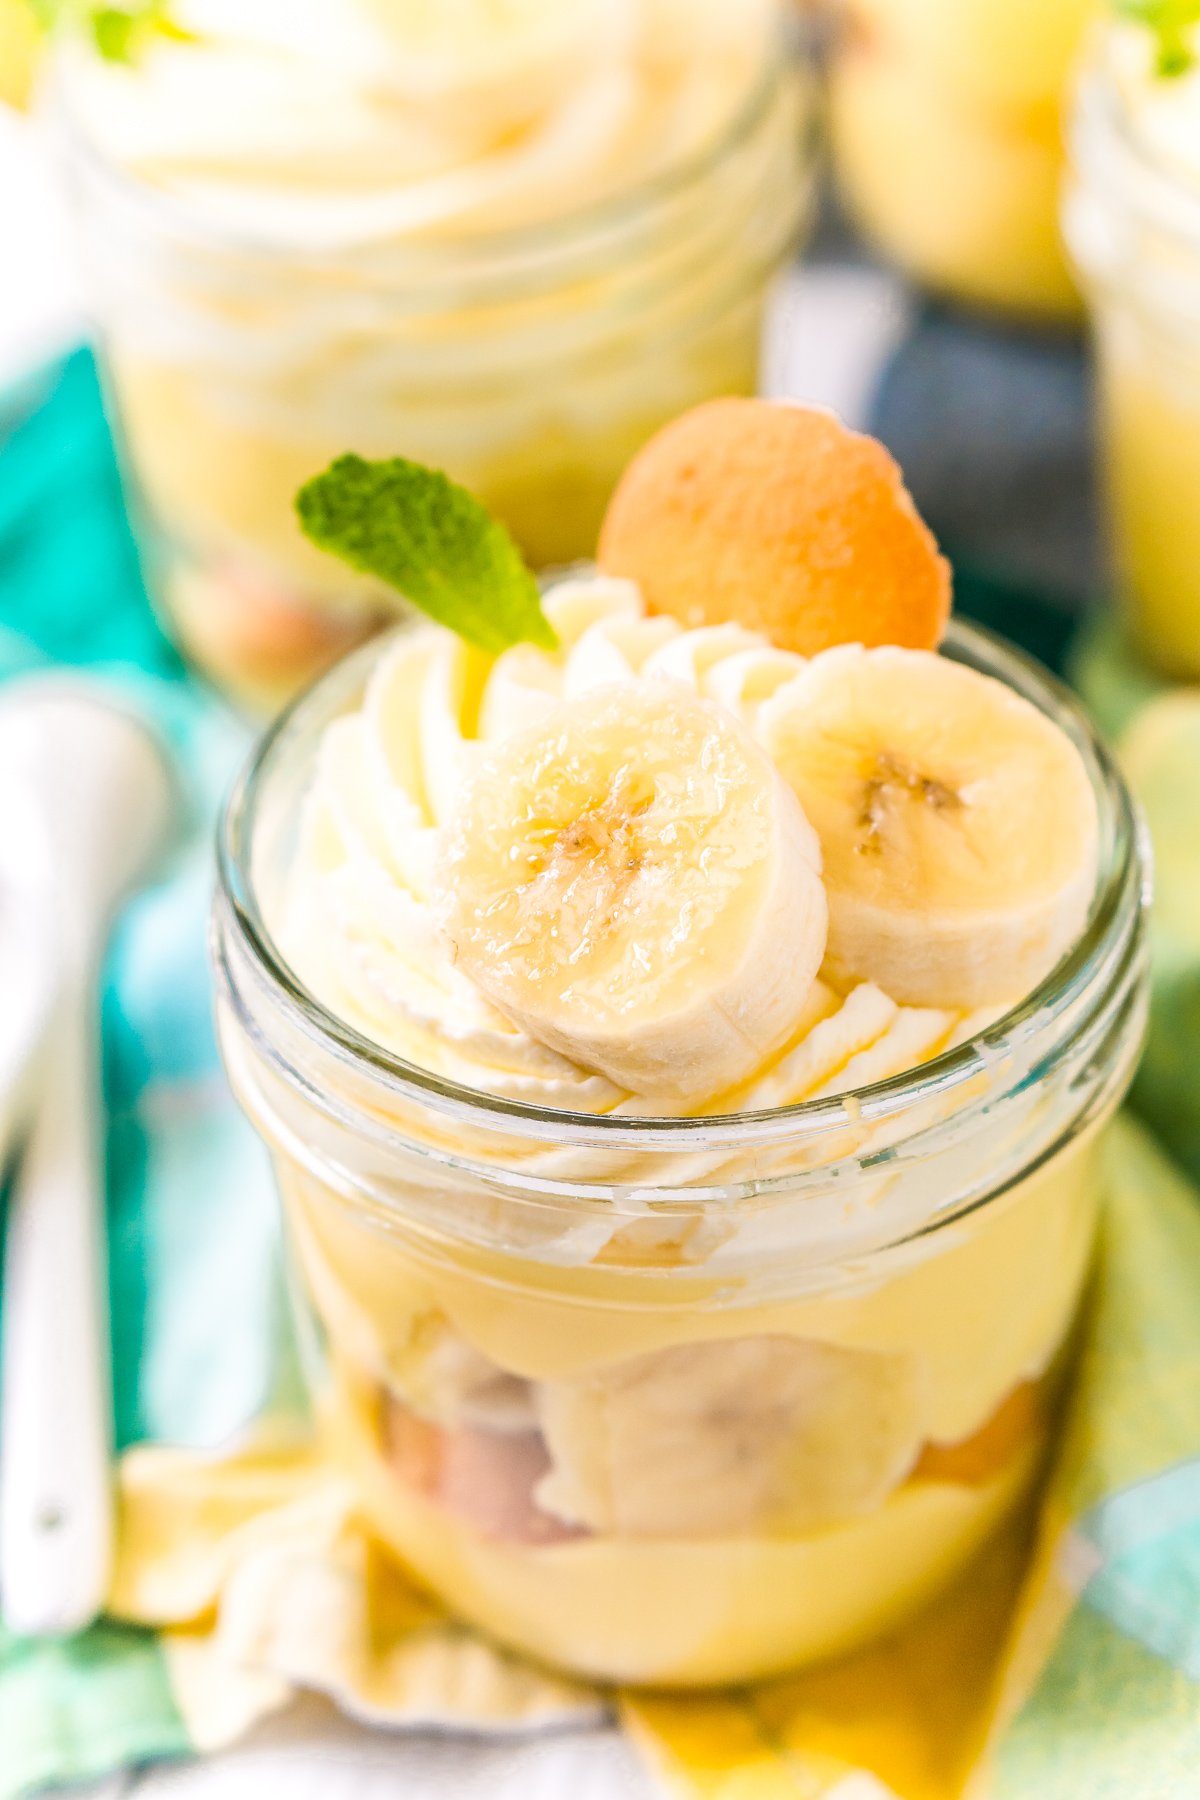 Small jar filled with banana pudding with banana slices, mint leaf, and nilla wafer on top.